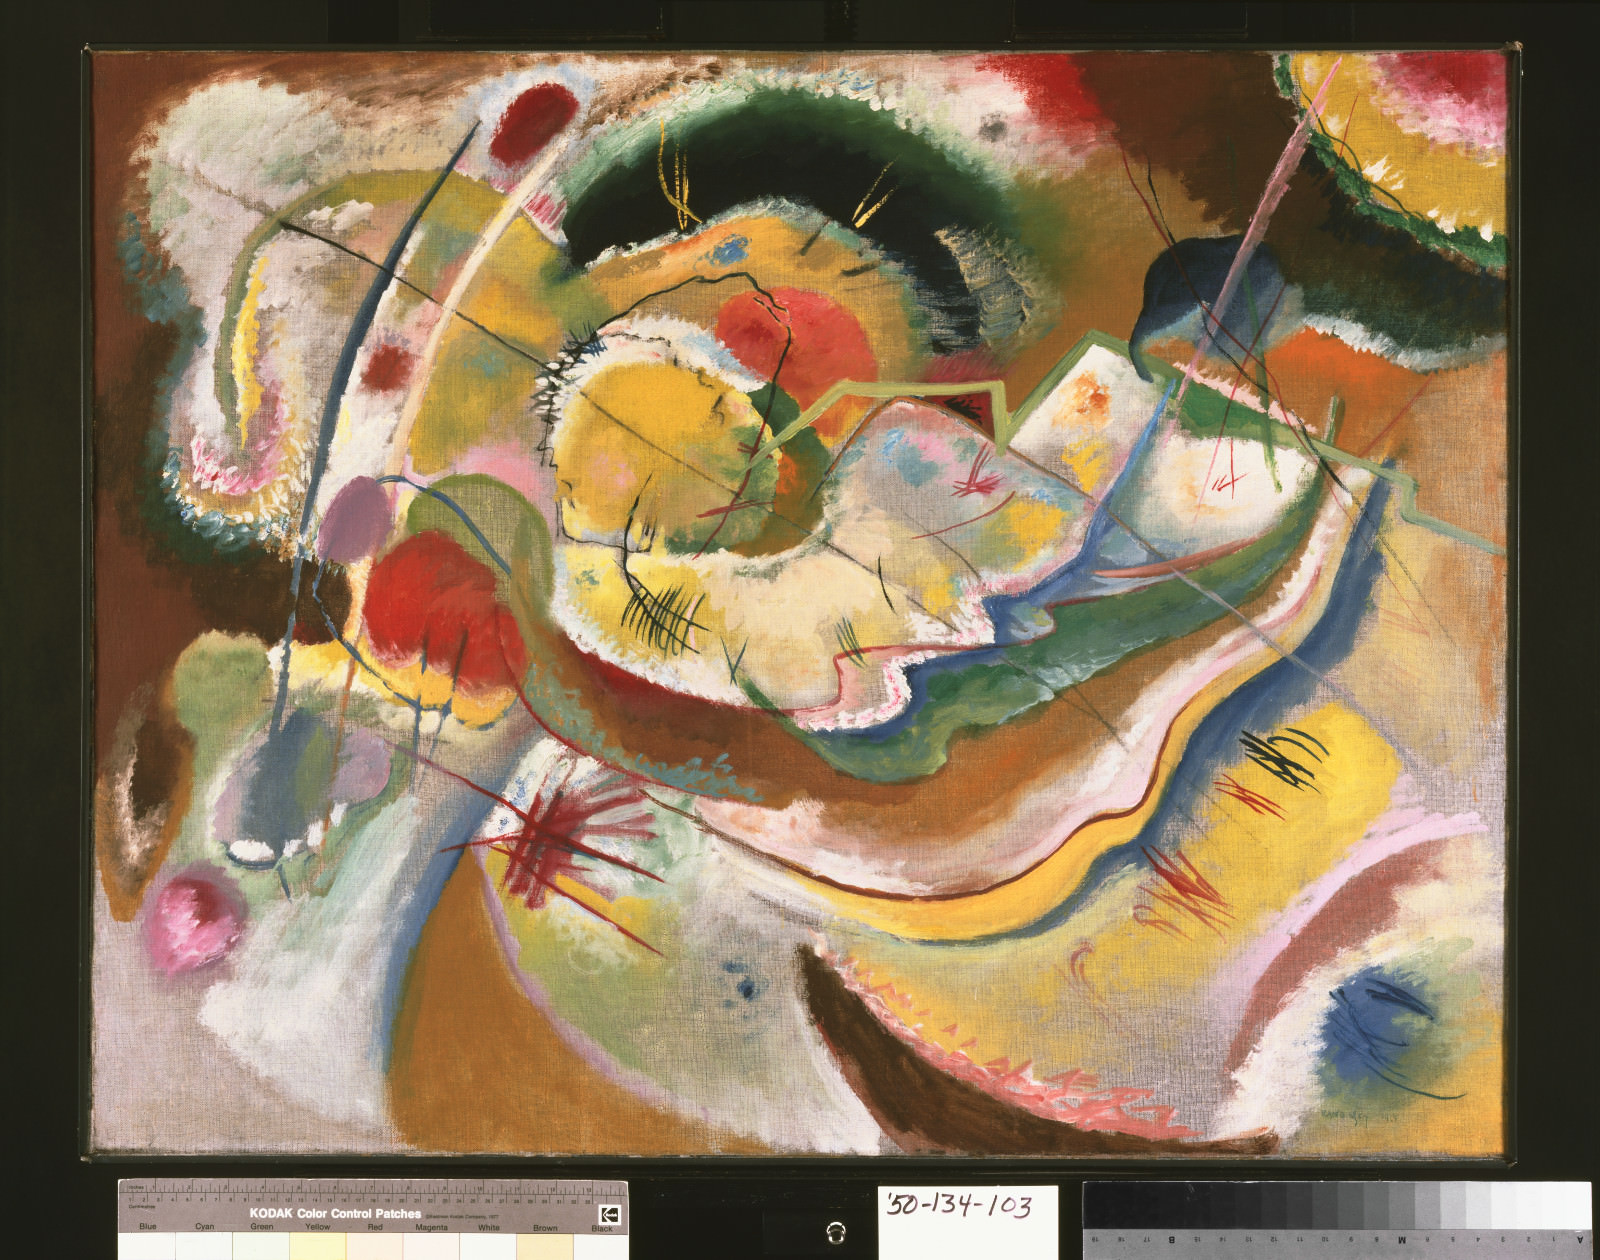 Fig. 4 – Vasily Kandinsky, Little Painting with Yellow (Improvisation), 1914, oil on canvas, 31 x 39 5/8 polegadas (78.7 x 100.6 cm) Framed: 32 3/4 x 41 1/2 x 2 1/2 poleinches.2 x 105.4 x 6.4 cx).cmhiladelphia Museum of Art, The Louise and Walter Arensberg Collection, 1950-134-103.